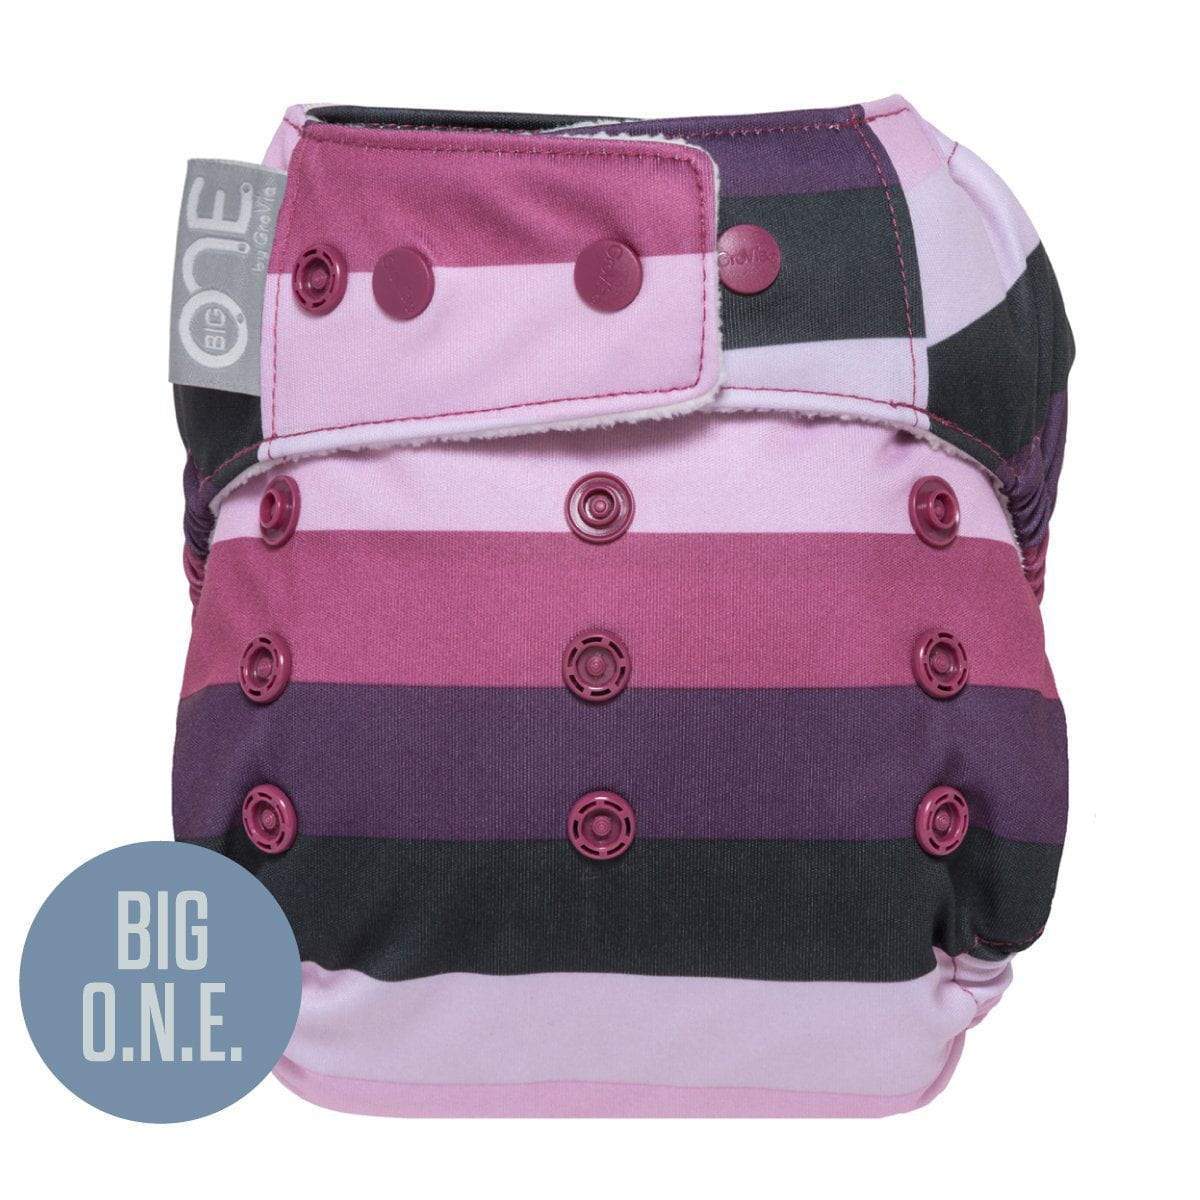 Cloth Diapers For Toddlers - Cloth Diaper